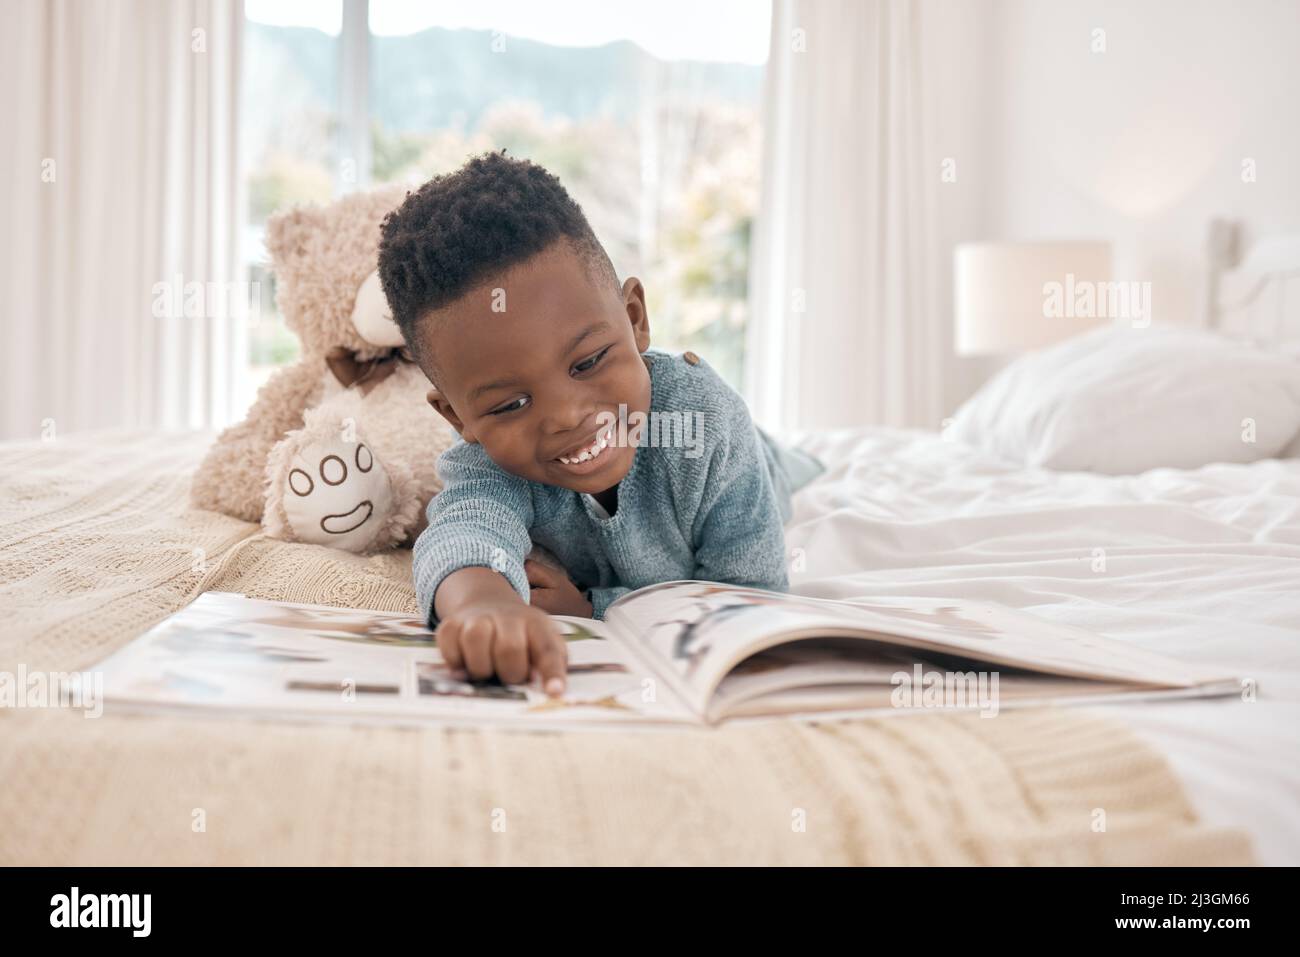 He loves reading. Full length shot of an adorable little boy reading a book on a bed at home. Stock Photo